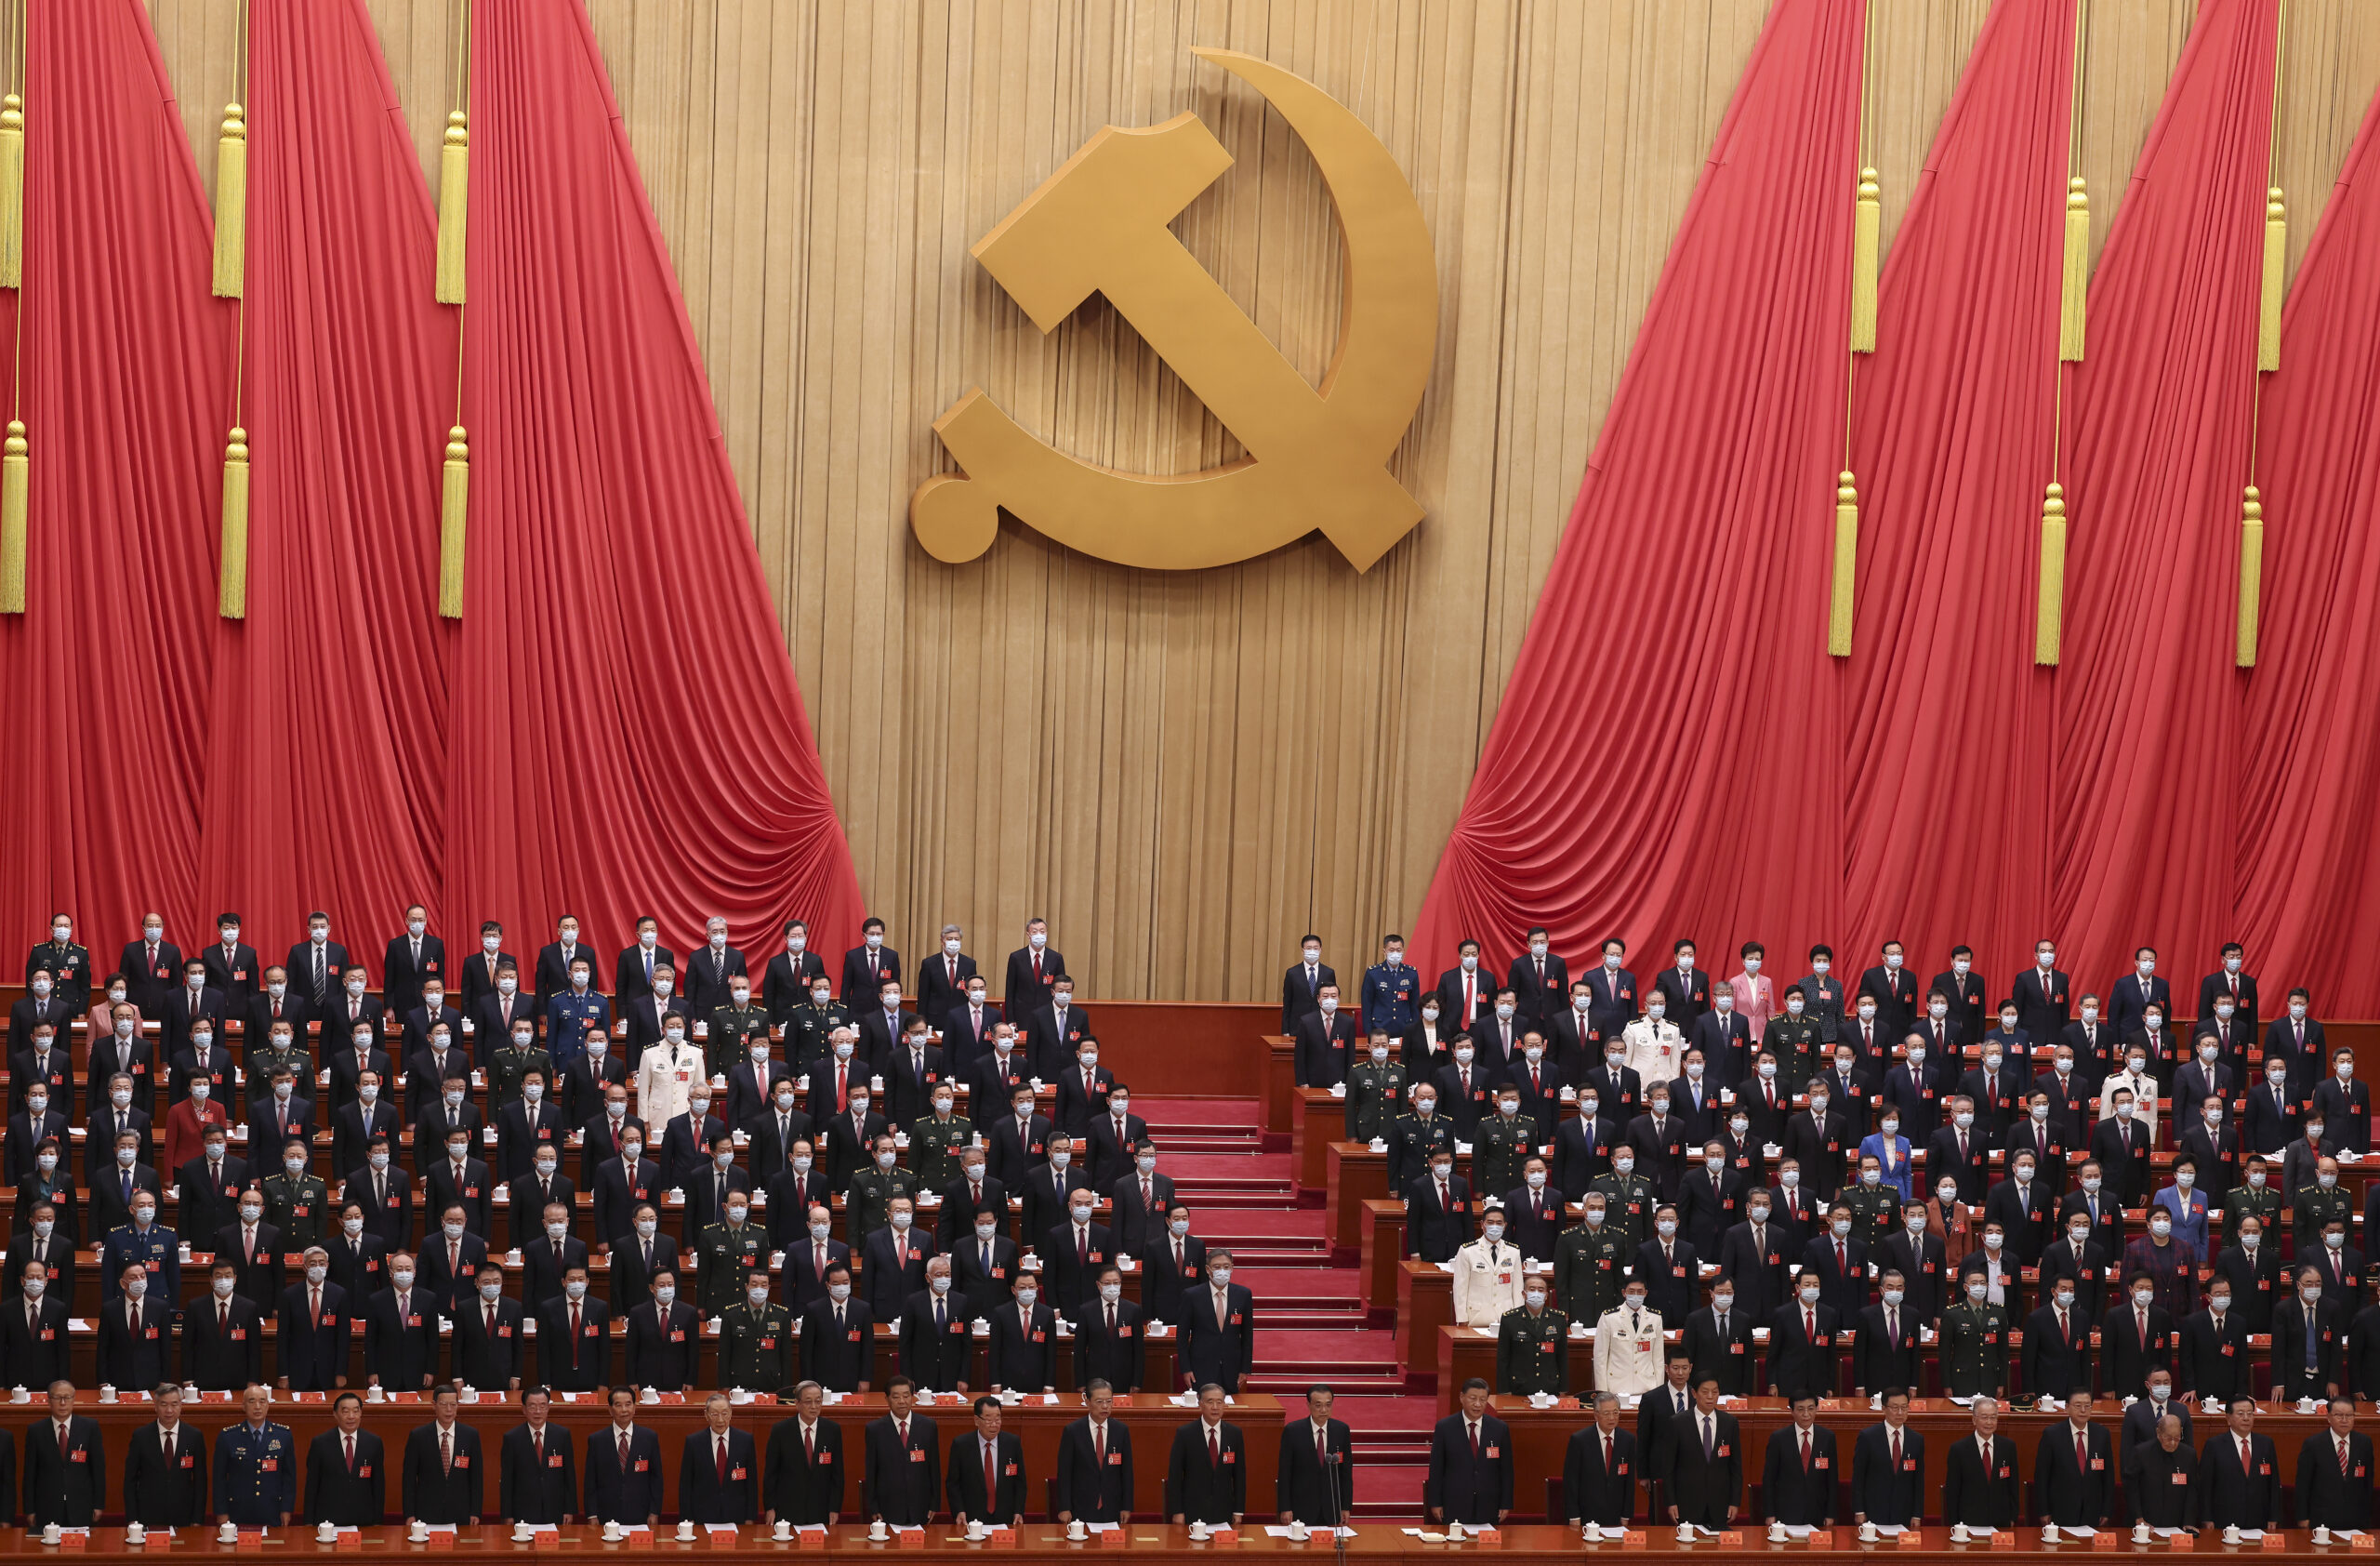 Chinese Communist Party threat to world peace